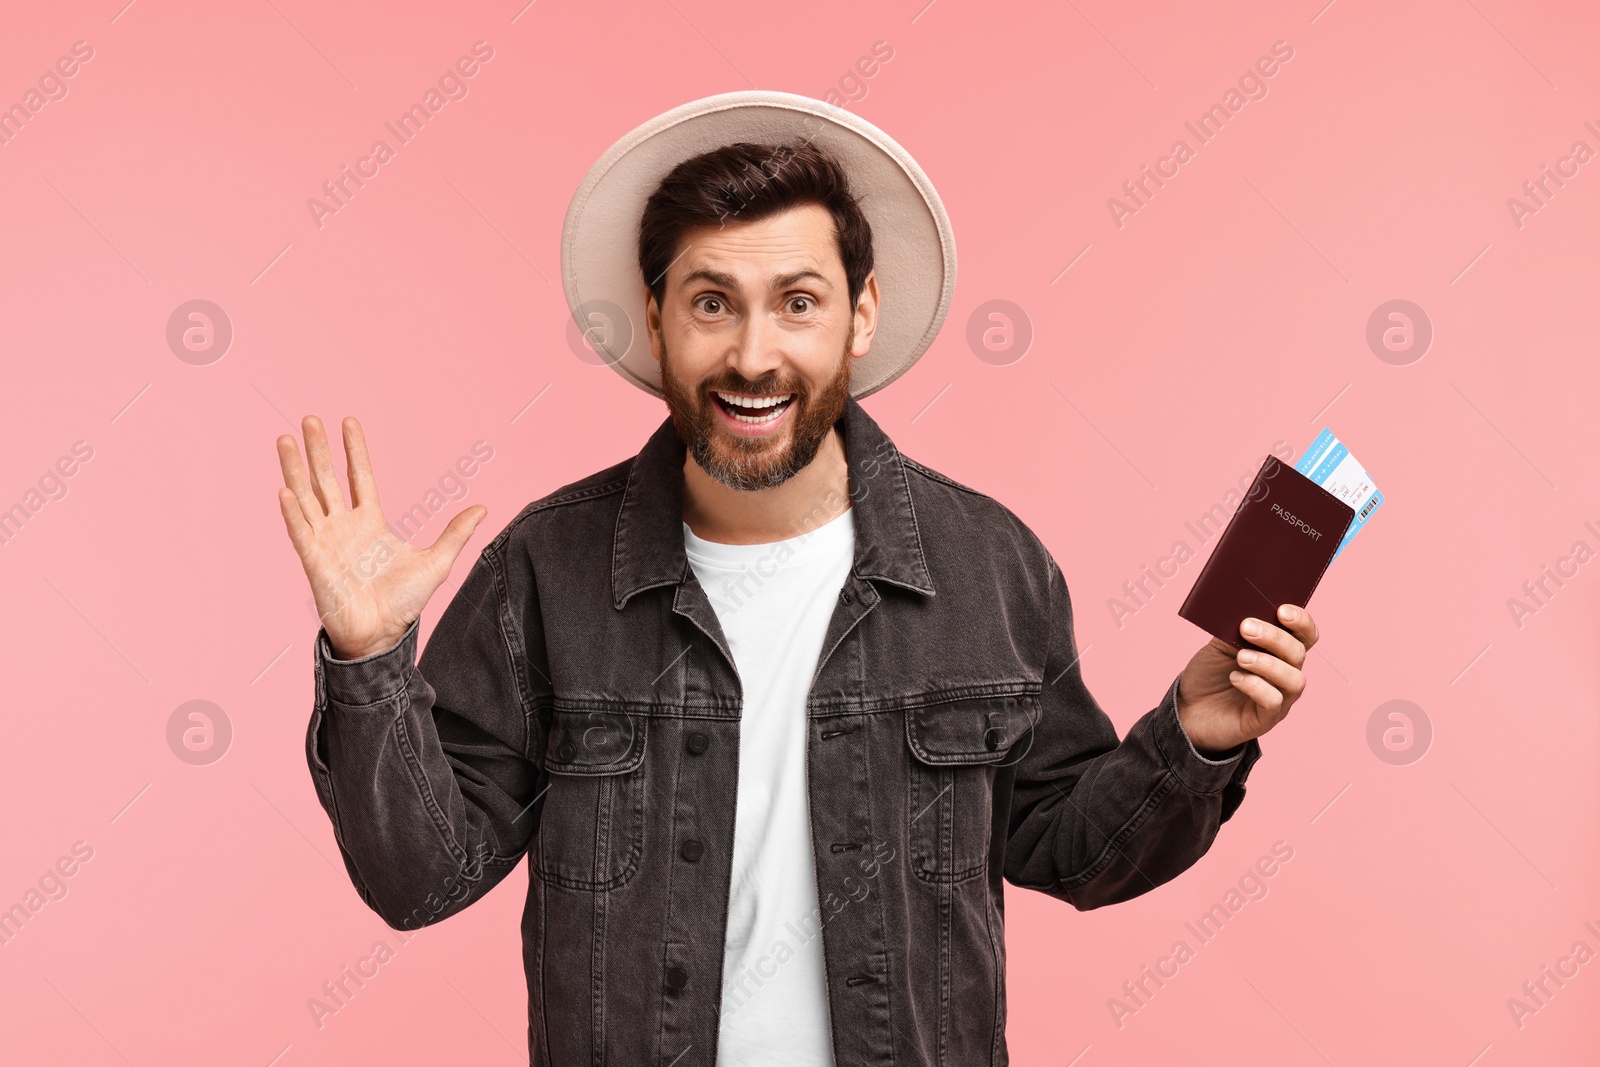 Photo of Smiling man with passport and tickets on pink background